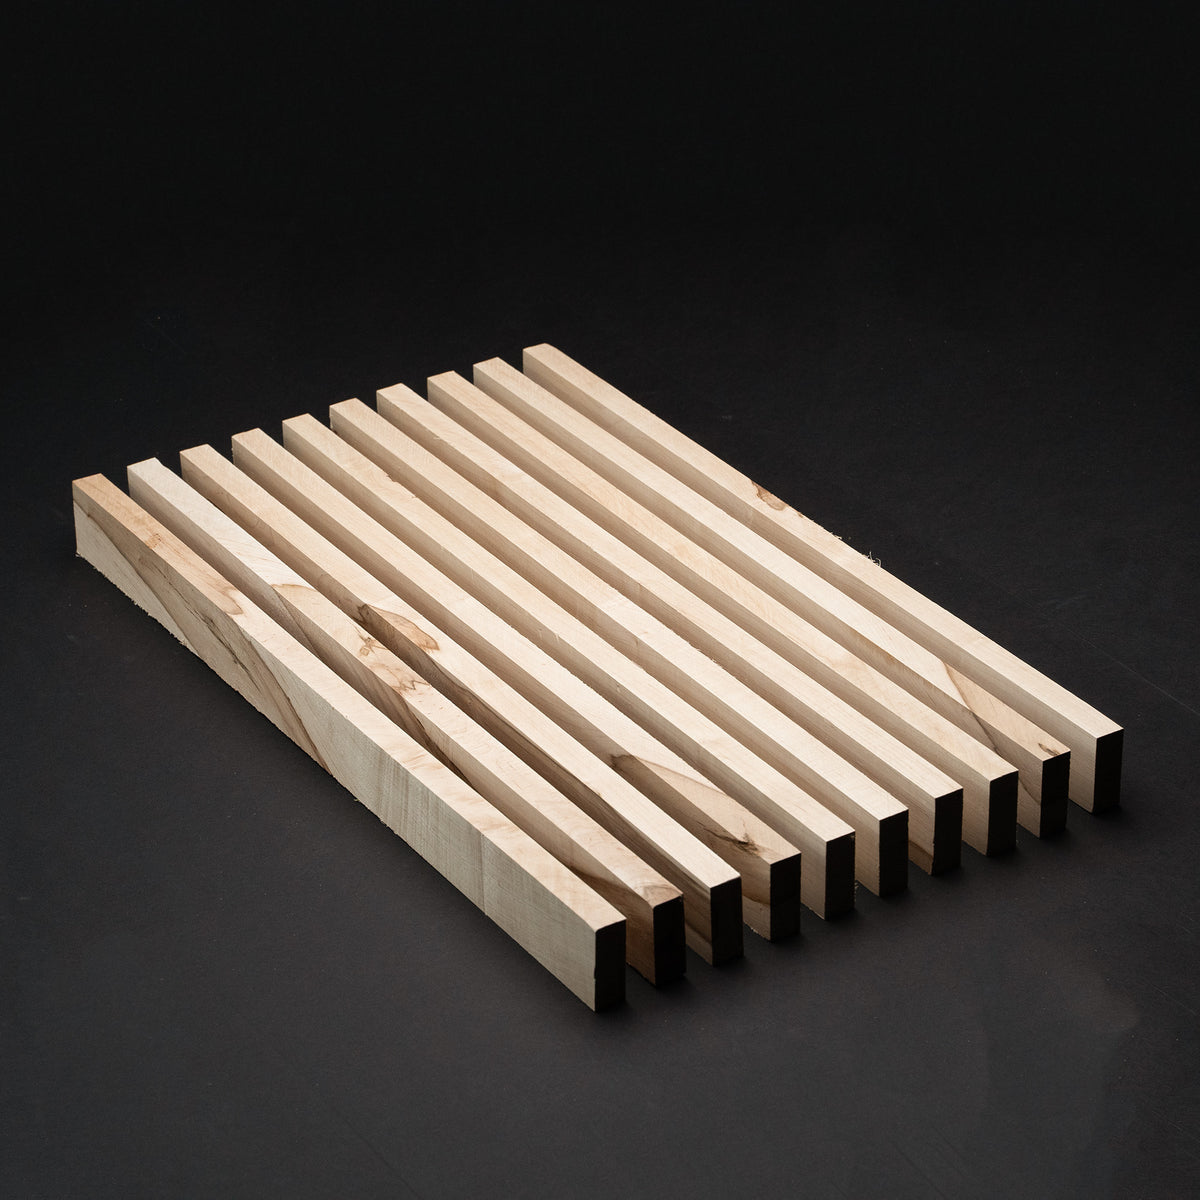 3/4&quot; x 2&quot; x 24&quot; Hard Maple Boards - Pack of 5, 10, 15 or 20 - DIY Cutting Charcuterie Cheese Boards Tray - Kiln Dried